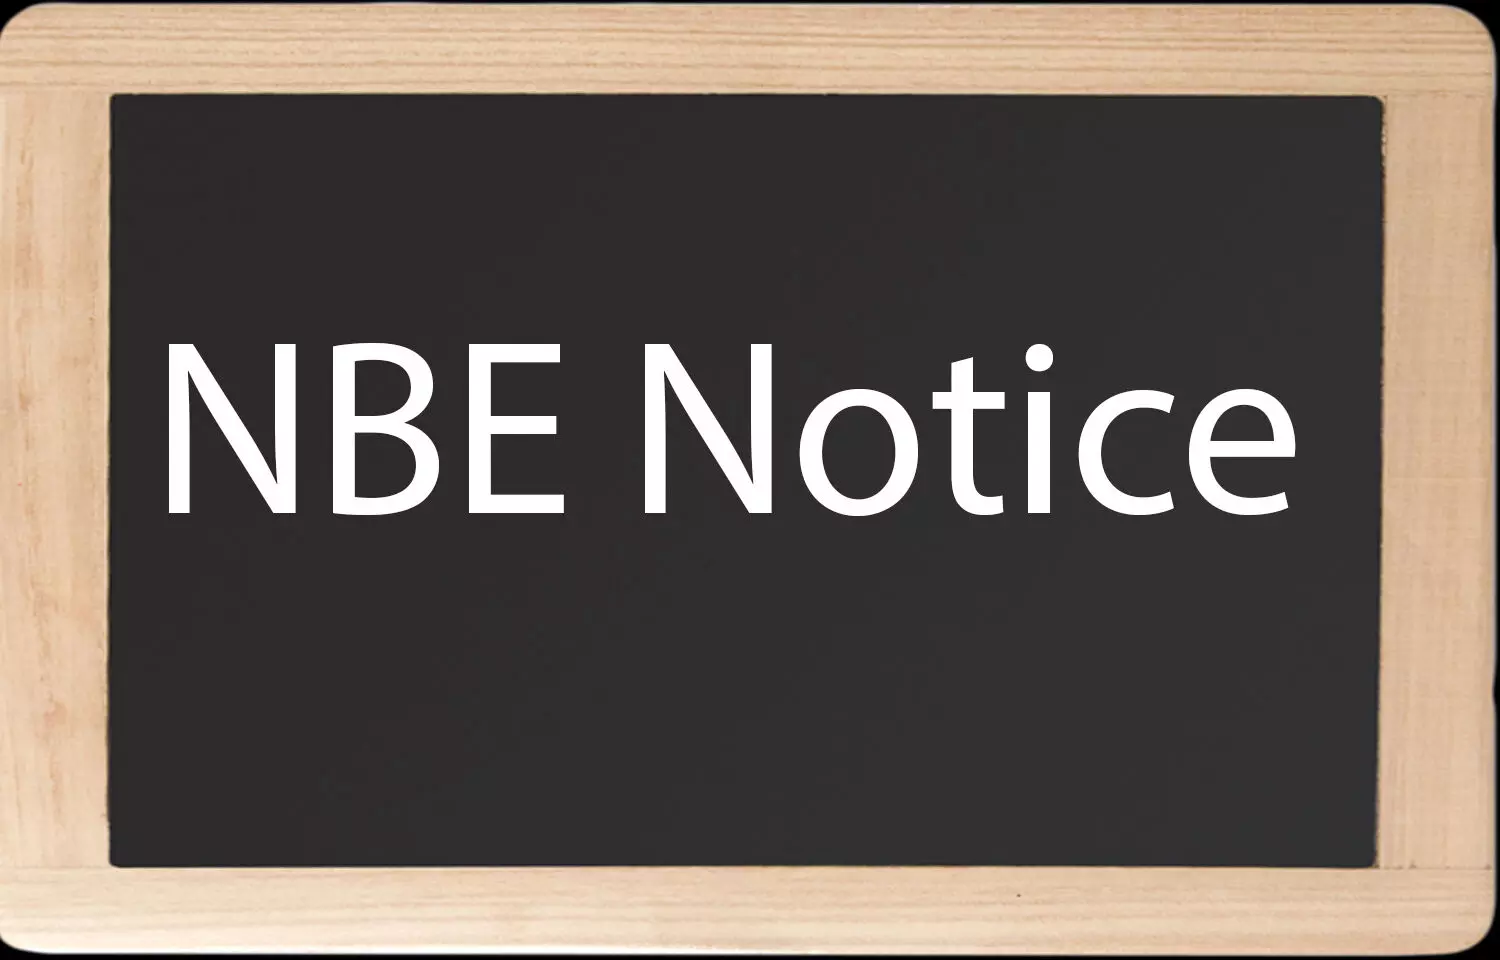 All final year DNB, DrNB, FNB trainees required to discharge COVID duties, mandates NBE